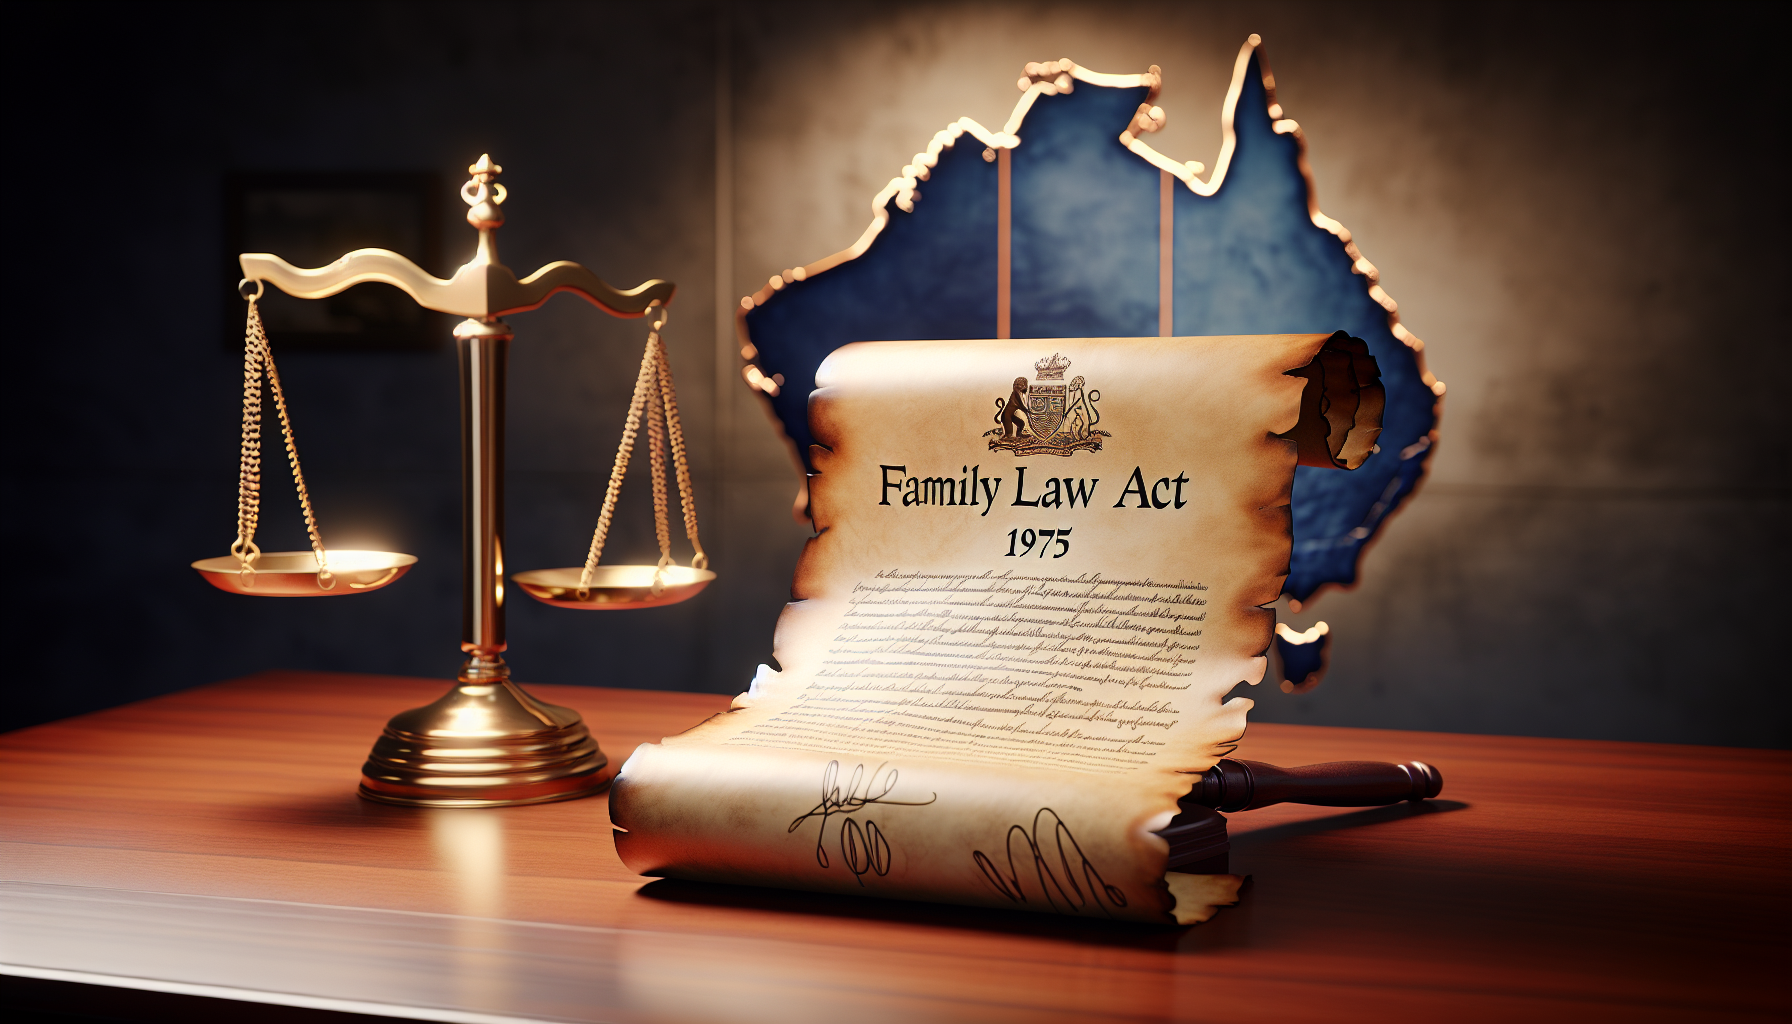 Illustration of a legal document in Family Law in Australia with 'Family Law Act 1975' written on it